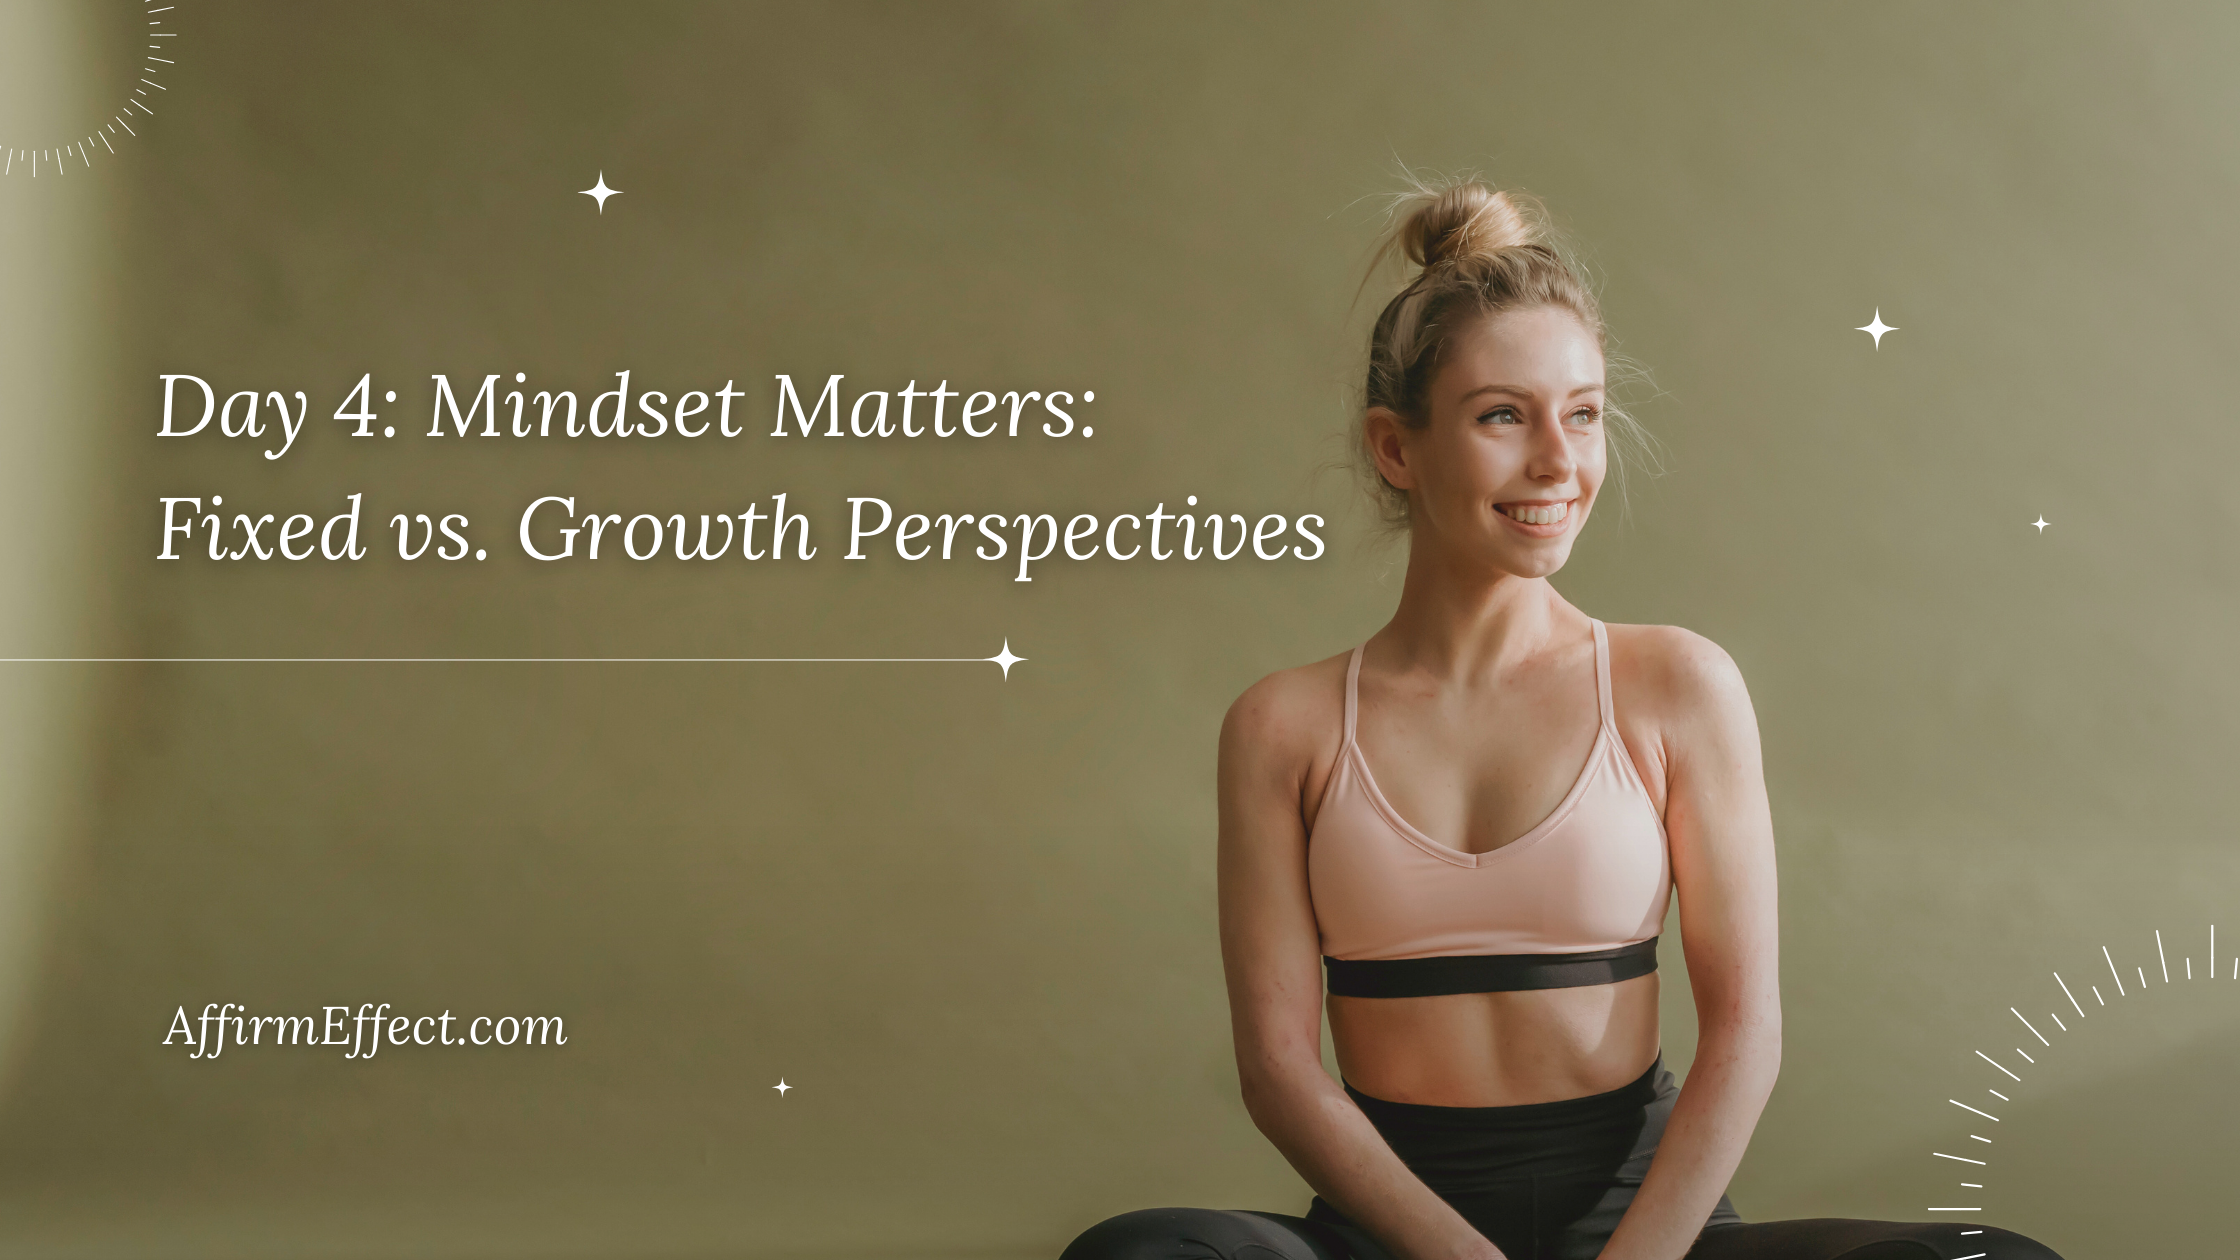 Day 4: Mindset Matters: Fixed vs. Growth Perspectives